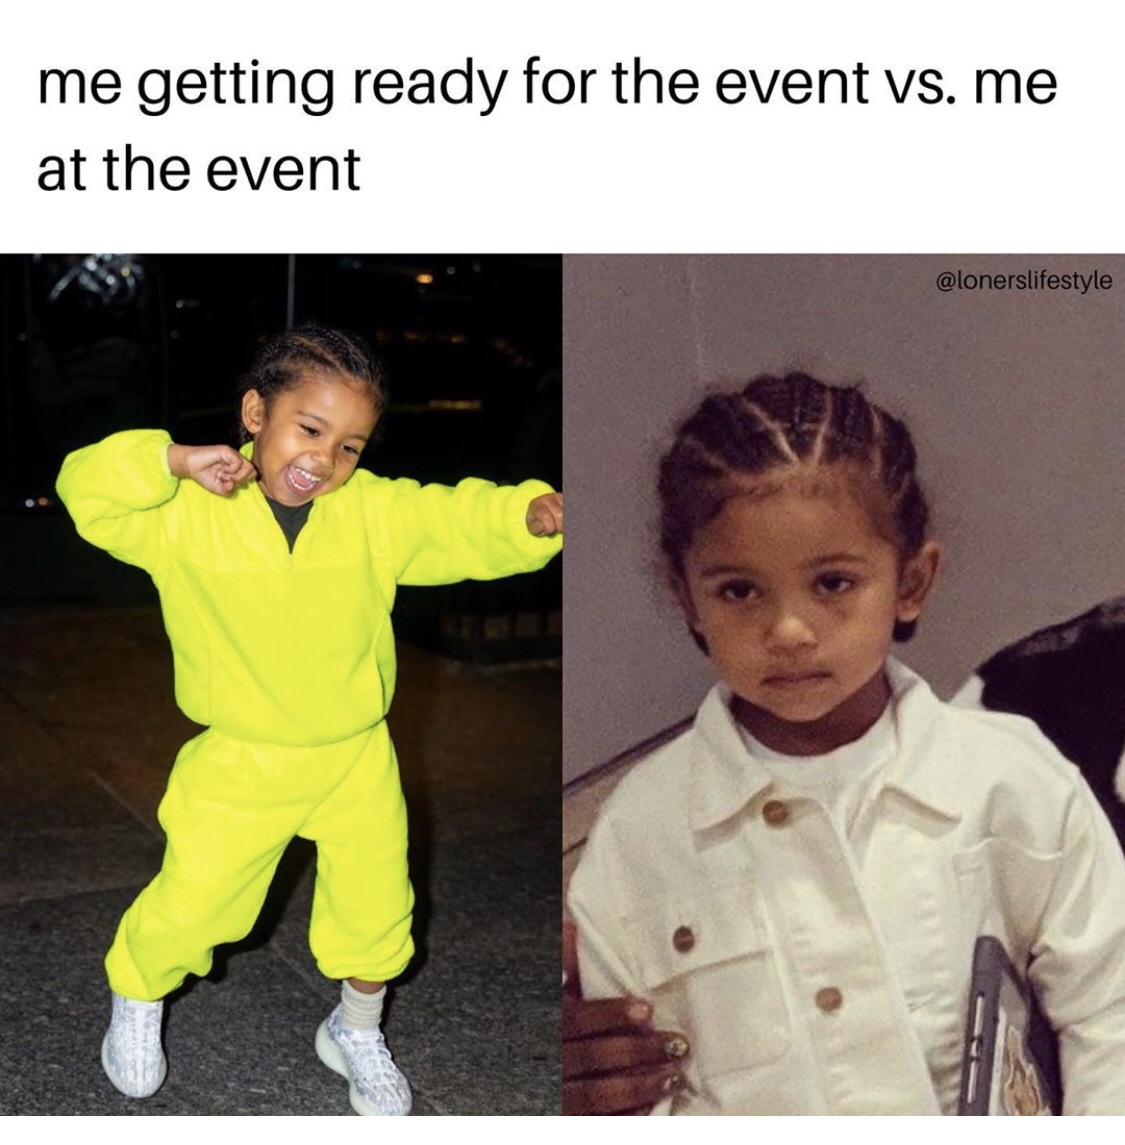 human behavior - me getting ready for the event vs. me at the event